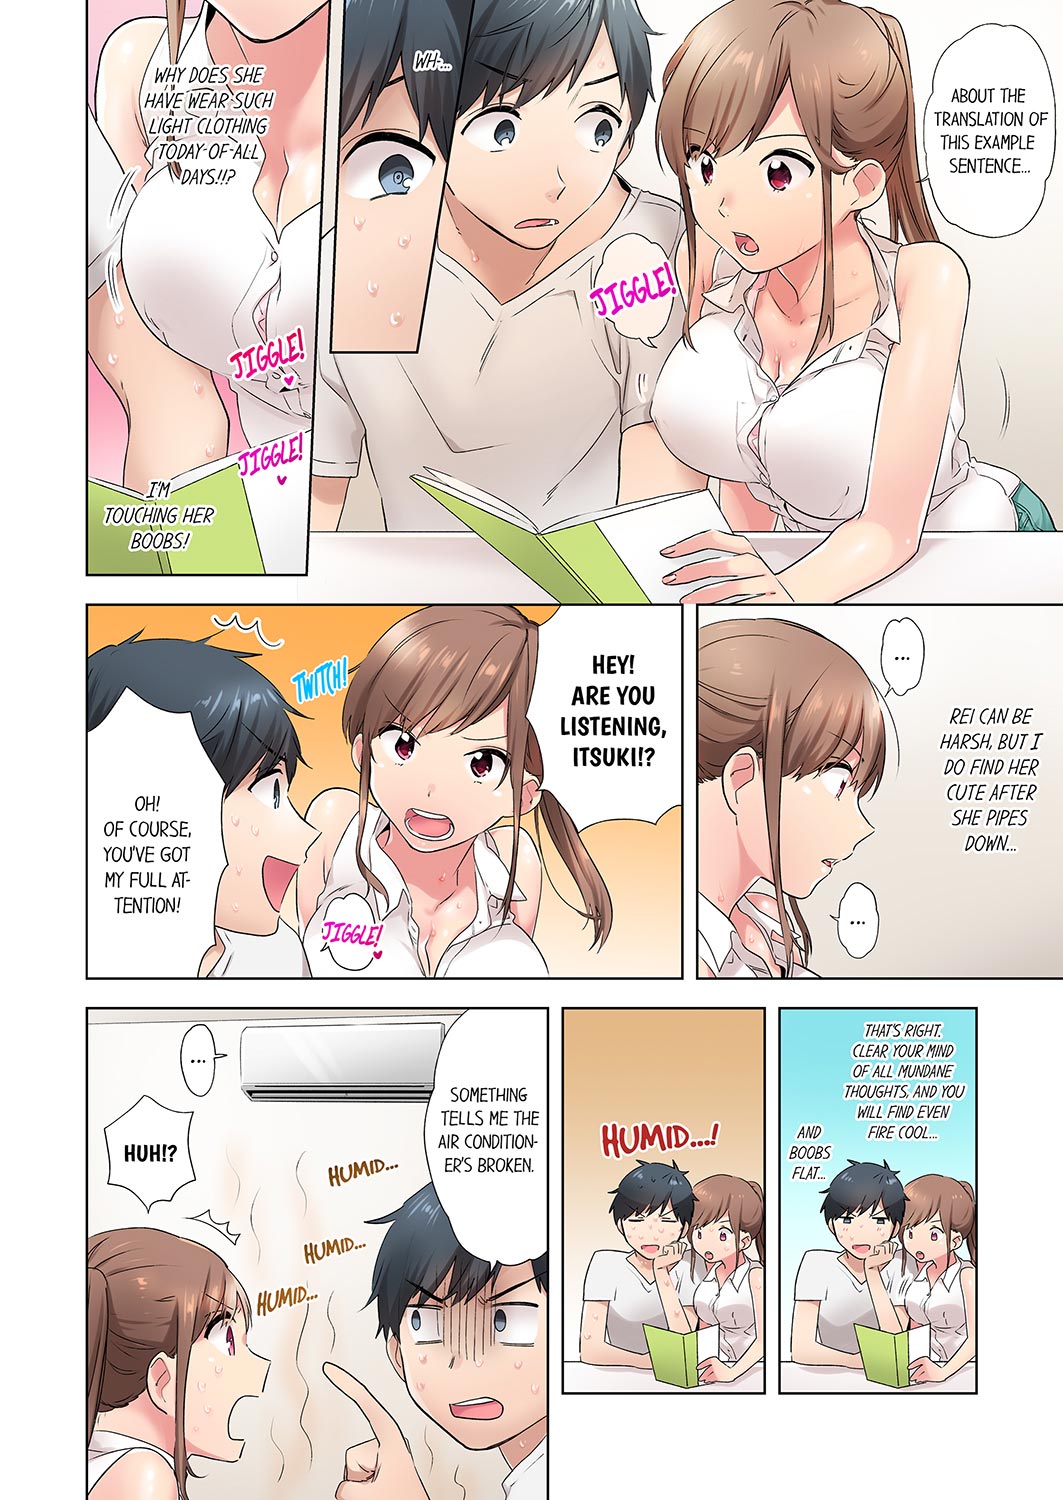 A Scorching Hot Day with A Broken Air Conditioner. If I Keep Having Sex with My Sweaty Childhood Friend… - Chapter 1 Page 4